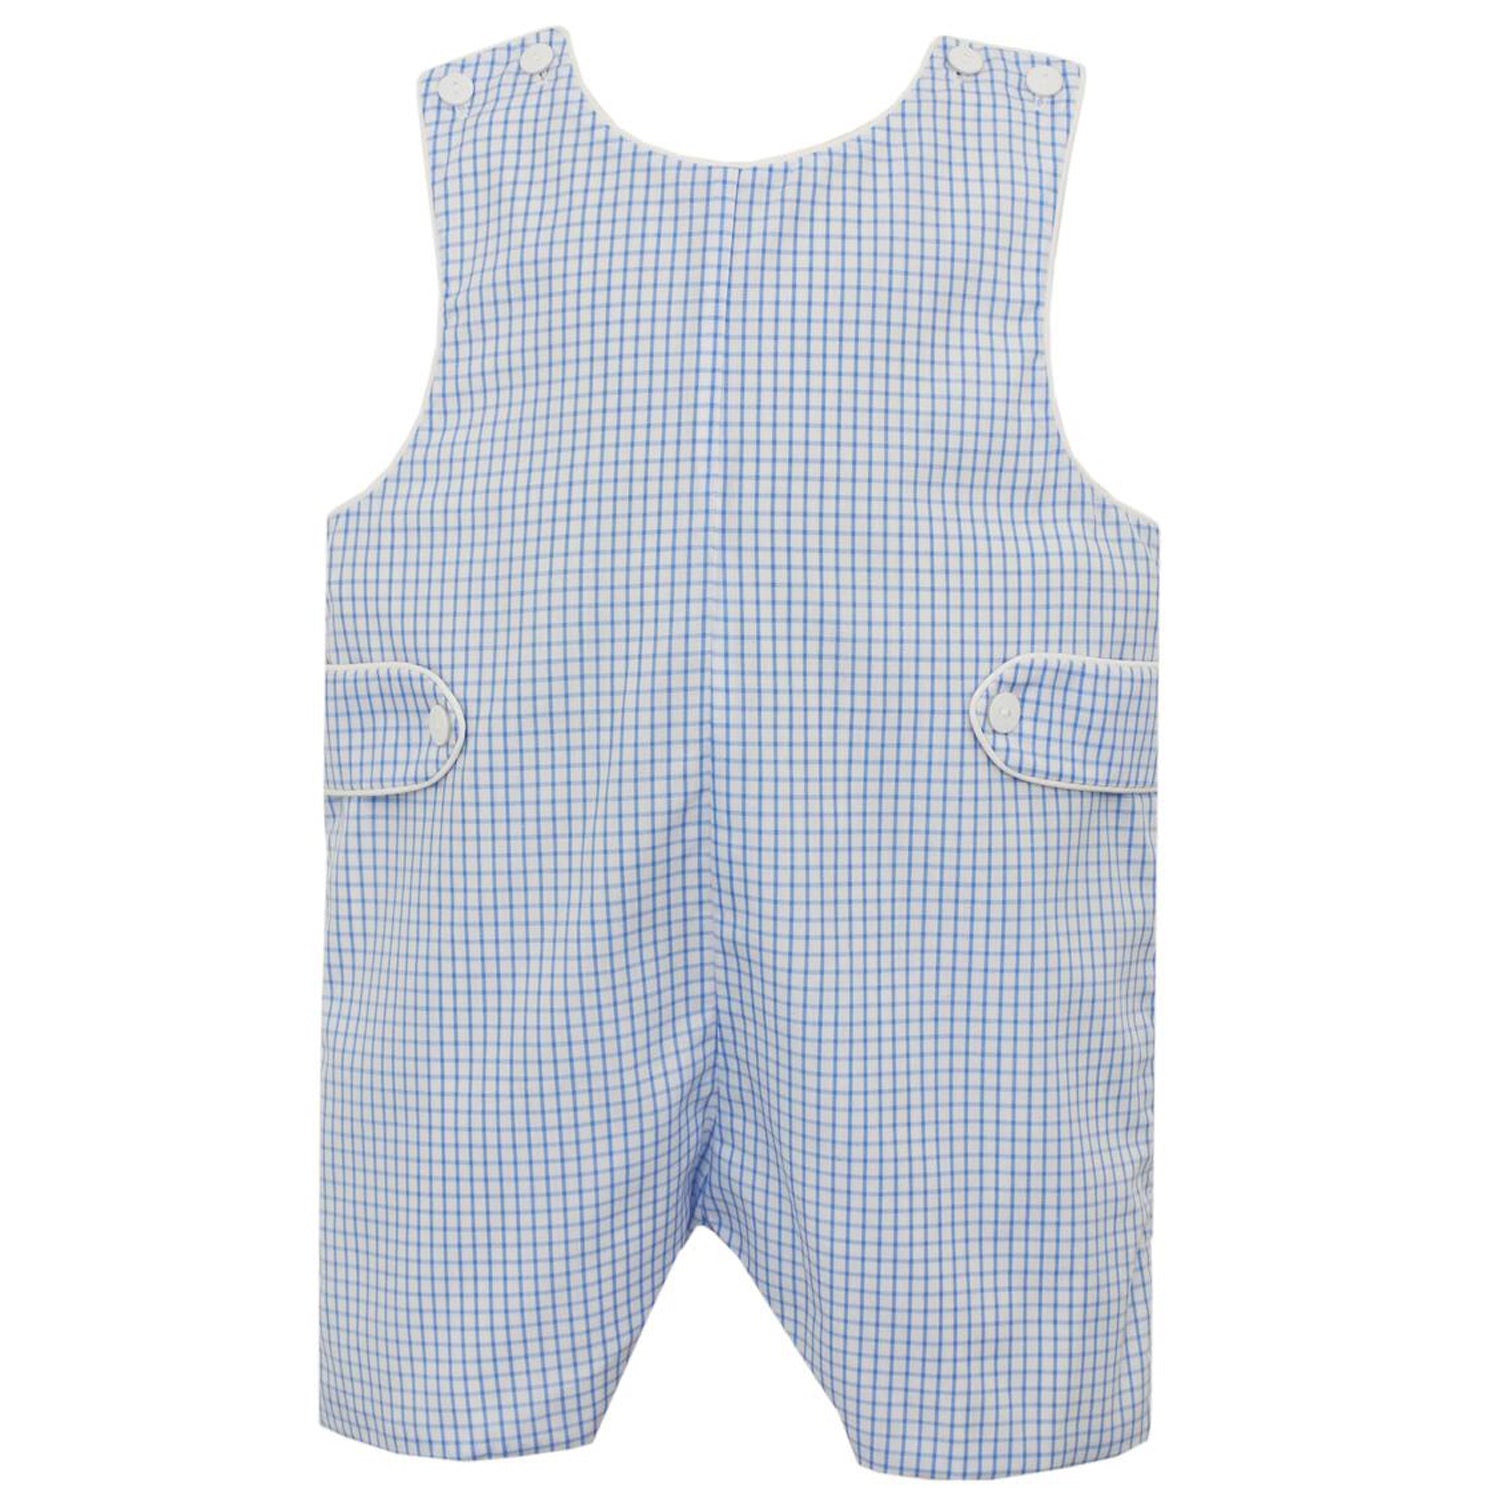 PETIT BEBE BABY / TODDLER BOYS BLUE CHECK SHORTALL WITH TABS